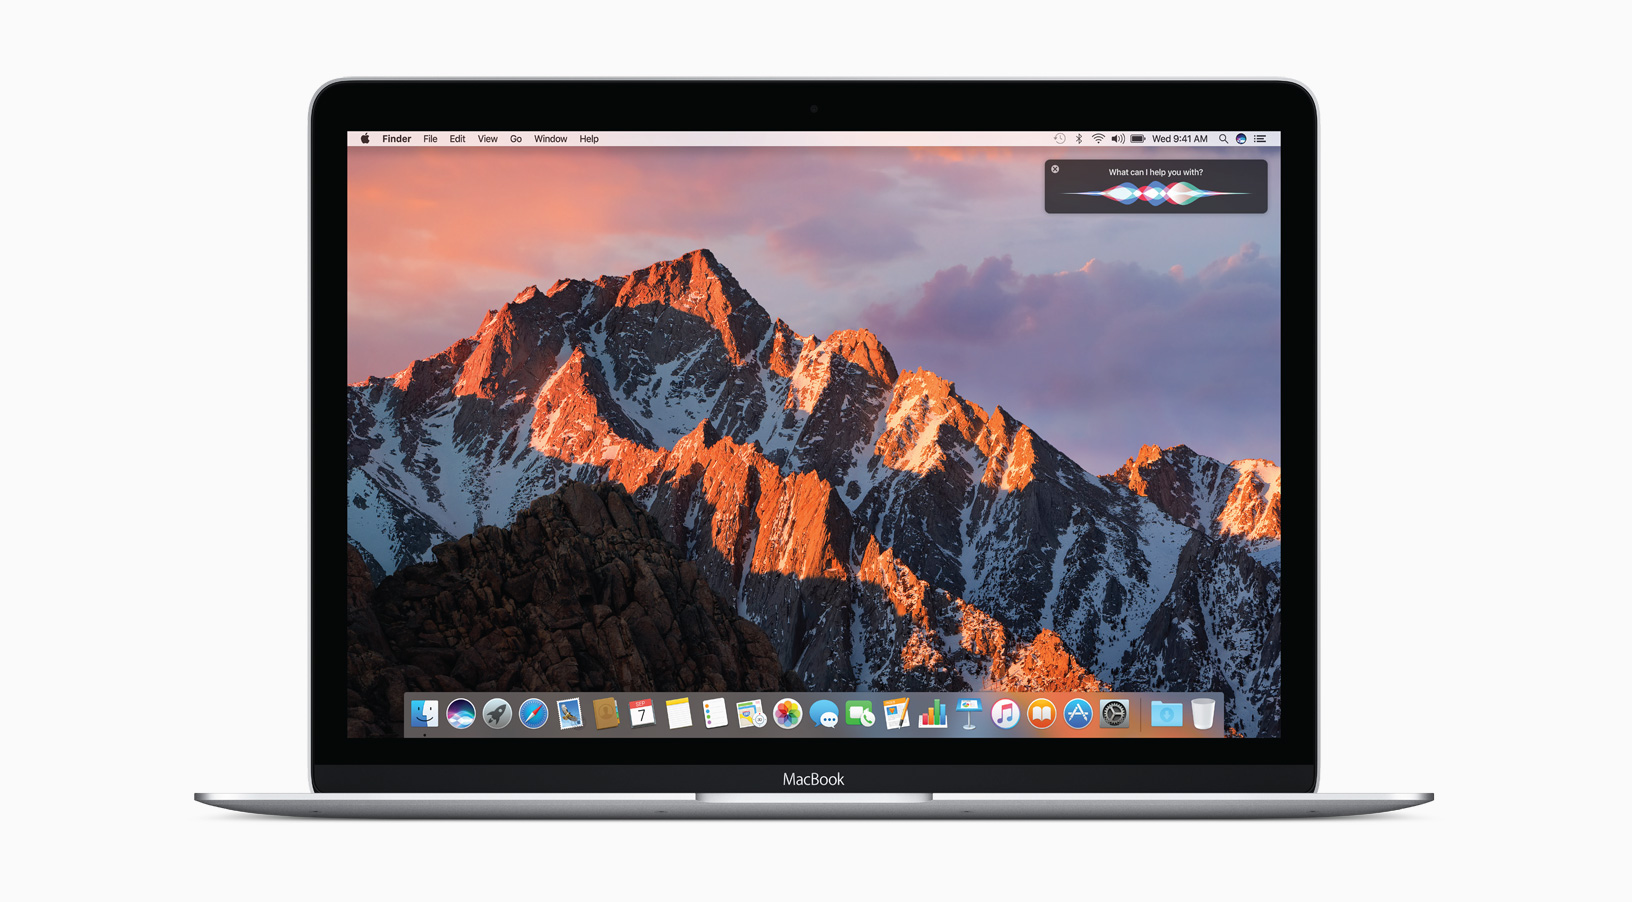 macOS Sierra Now Available As A Free Update